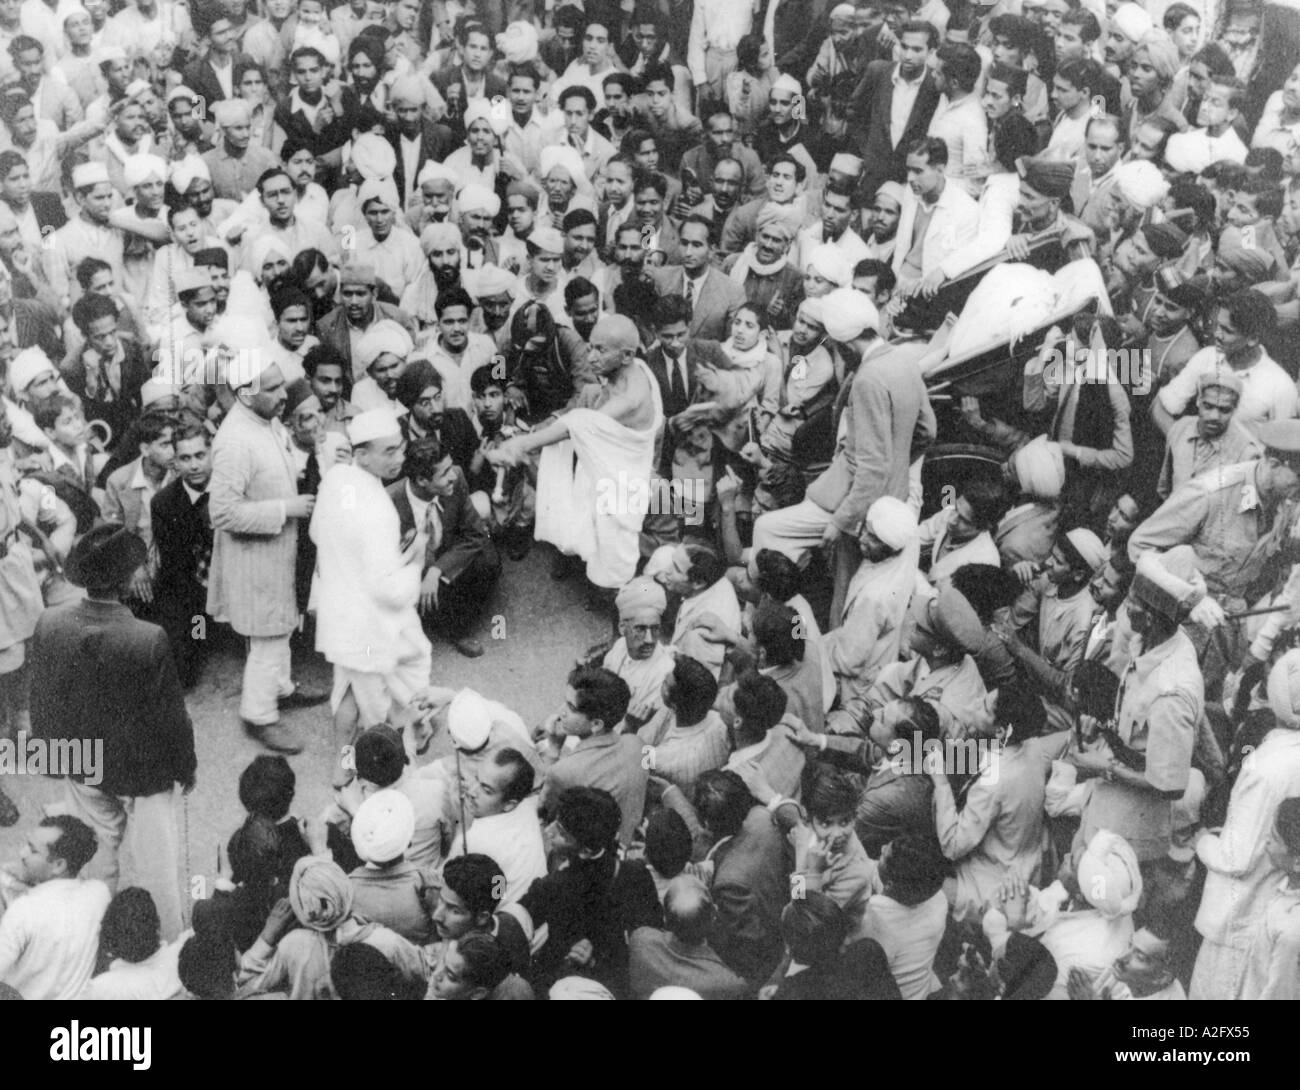 Mahatma Gandhi on the way to see the Indian Viceroy at Simla Himachal Pradesh India 23 June 1945 old vintage 1900s picture Stock Photo